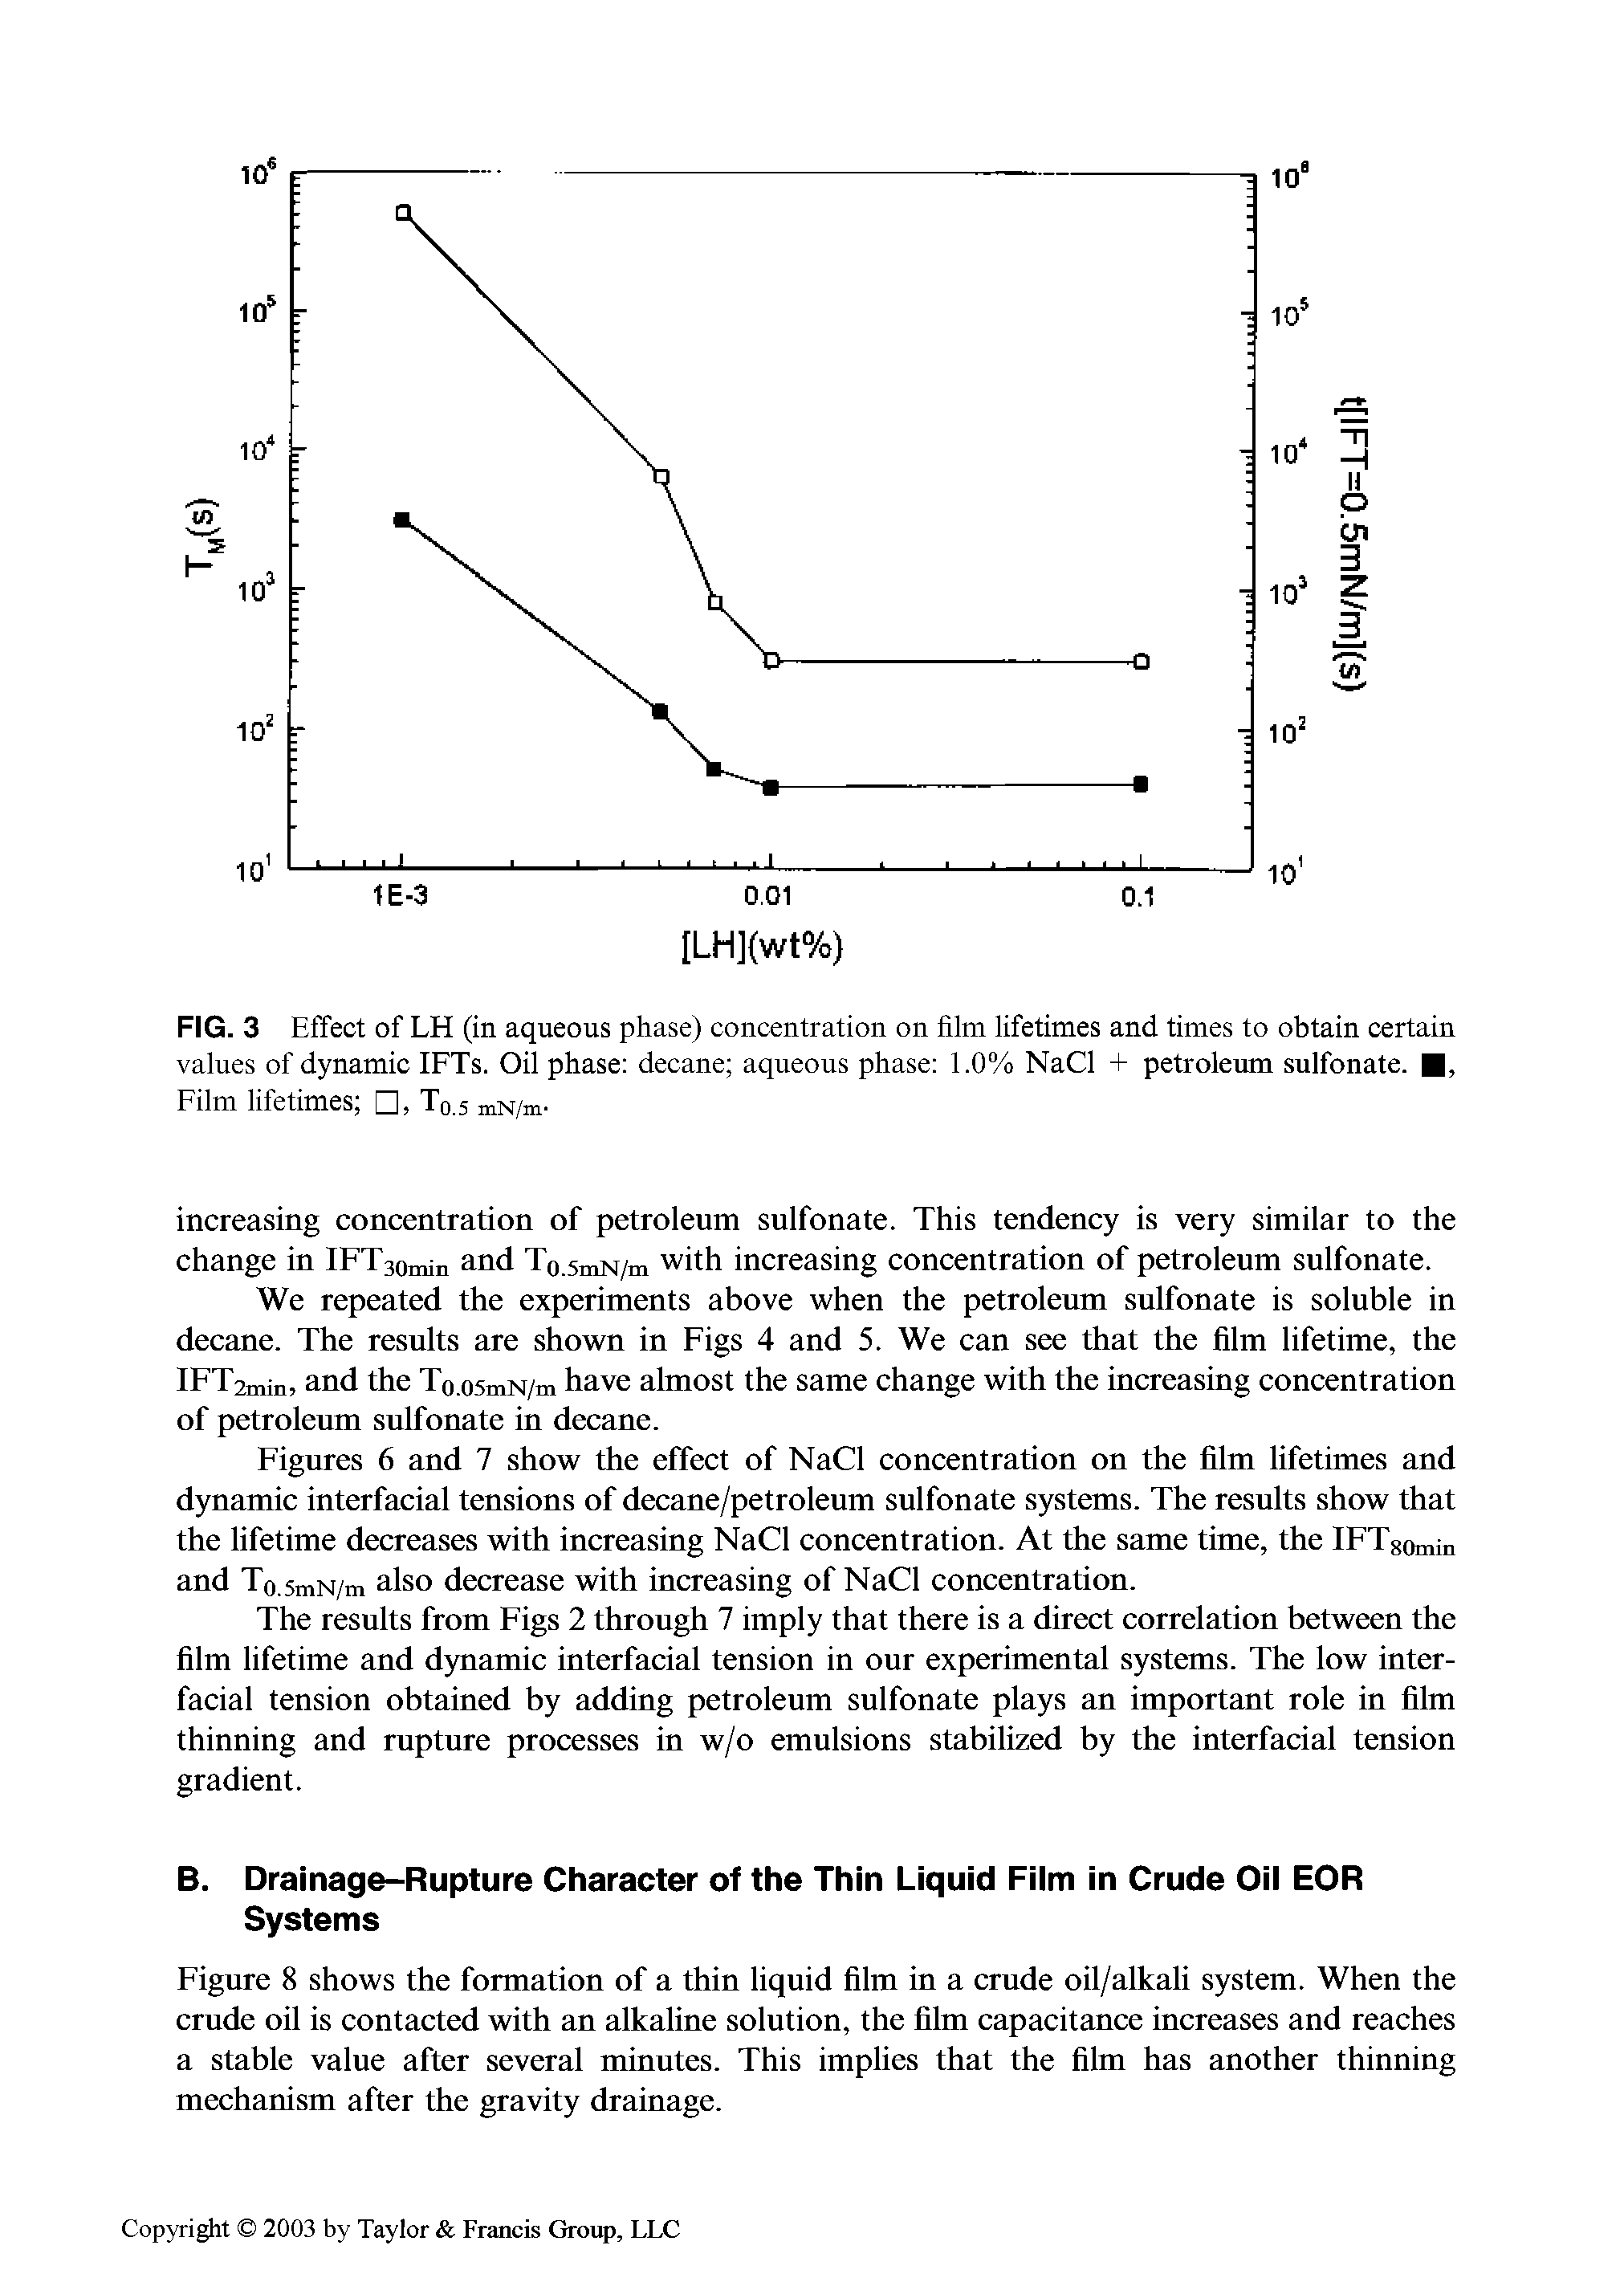 Figures 6 and 7 show the effect of NaCl concentration on the film lifetimes and dynamic interfacial tensions of decane/petroleum sulfonate systems. The results show that the lifetime decreases with increasing NaCl concentration. At the same time, the IFTsnm.n and To,5mN/m also decrease with increasing of NaCl concentration.